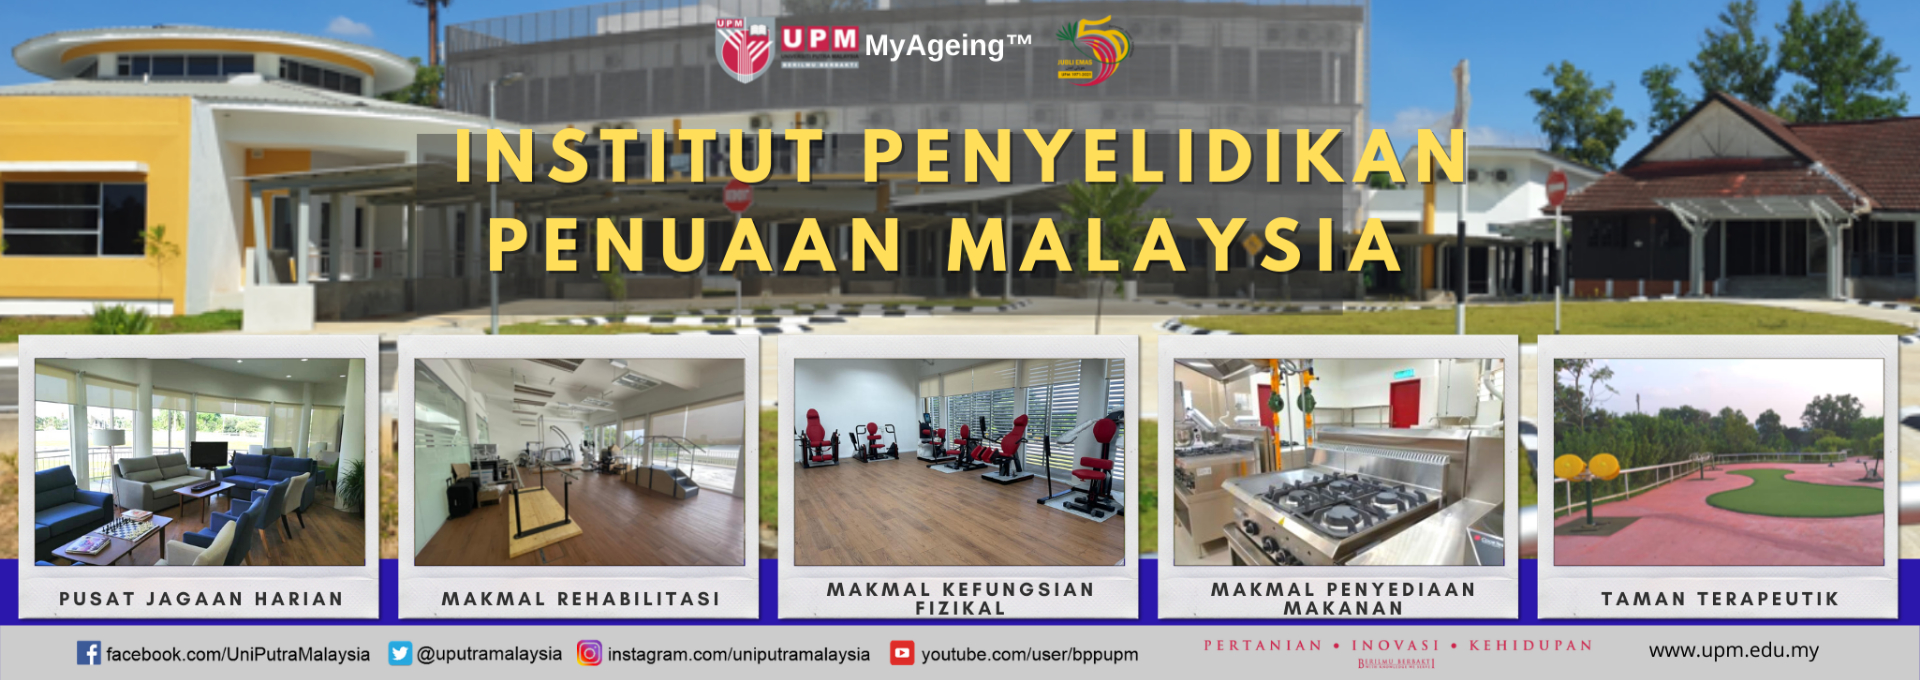 Facilities and Services at MyAgeing